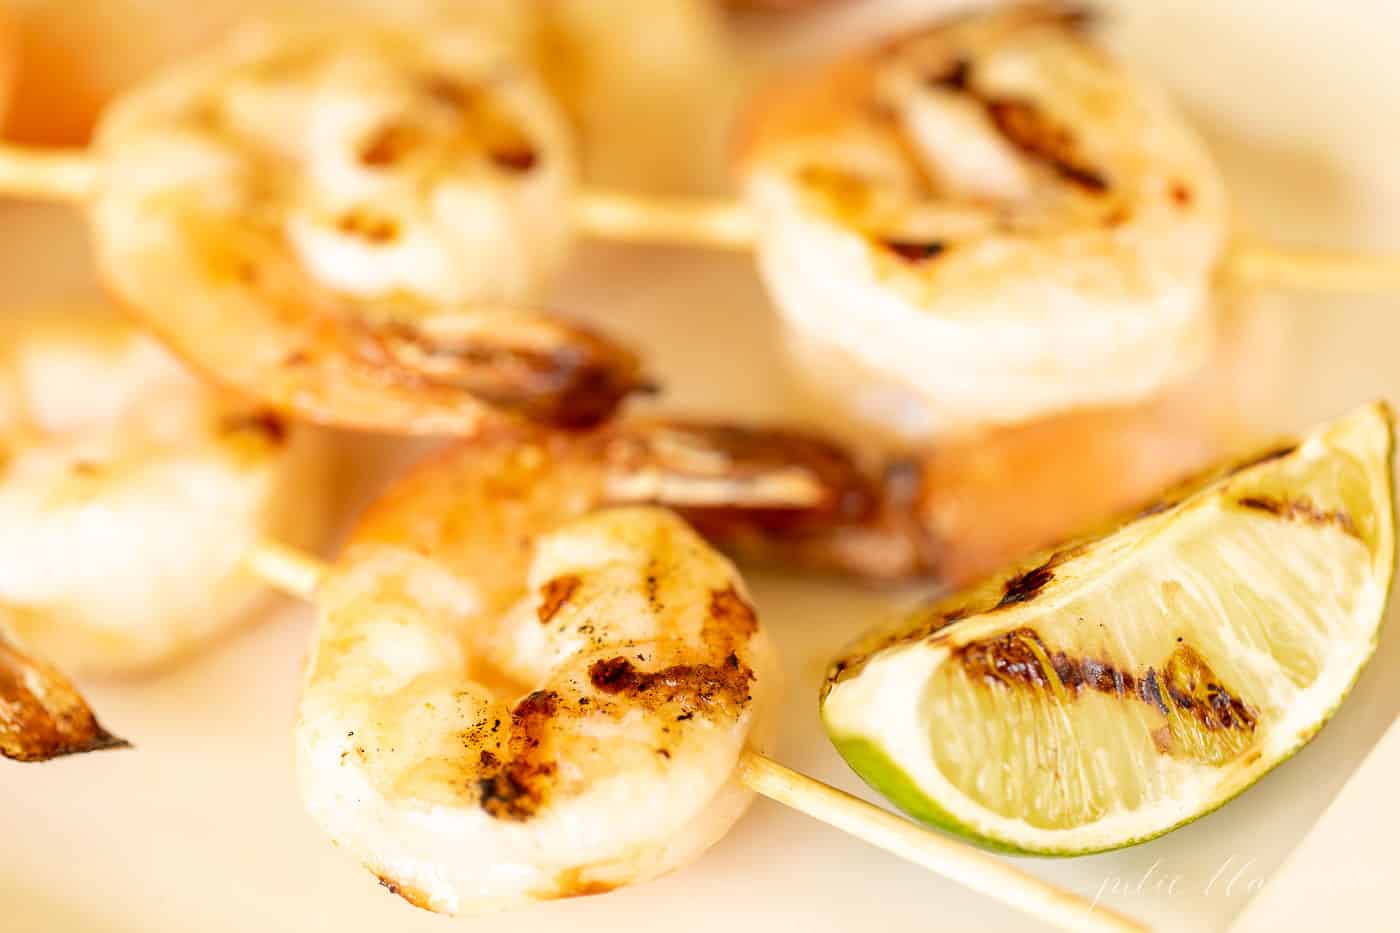 Grilled shrimp skewers with a grilled slice of lime.